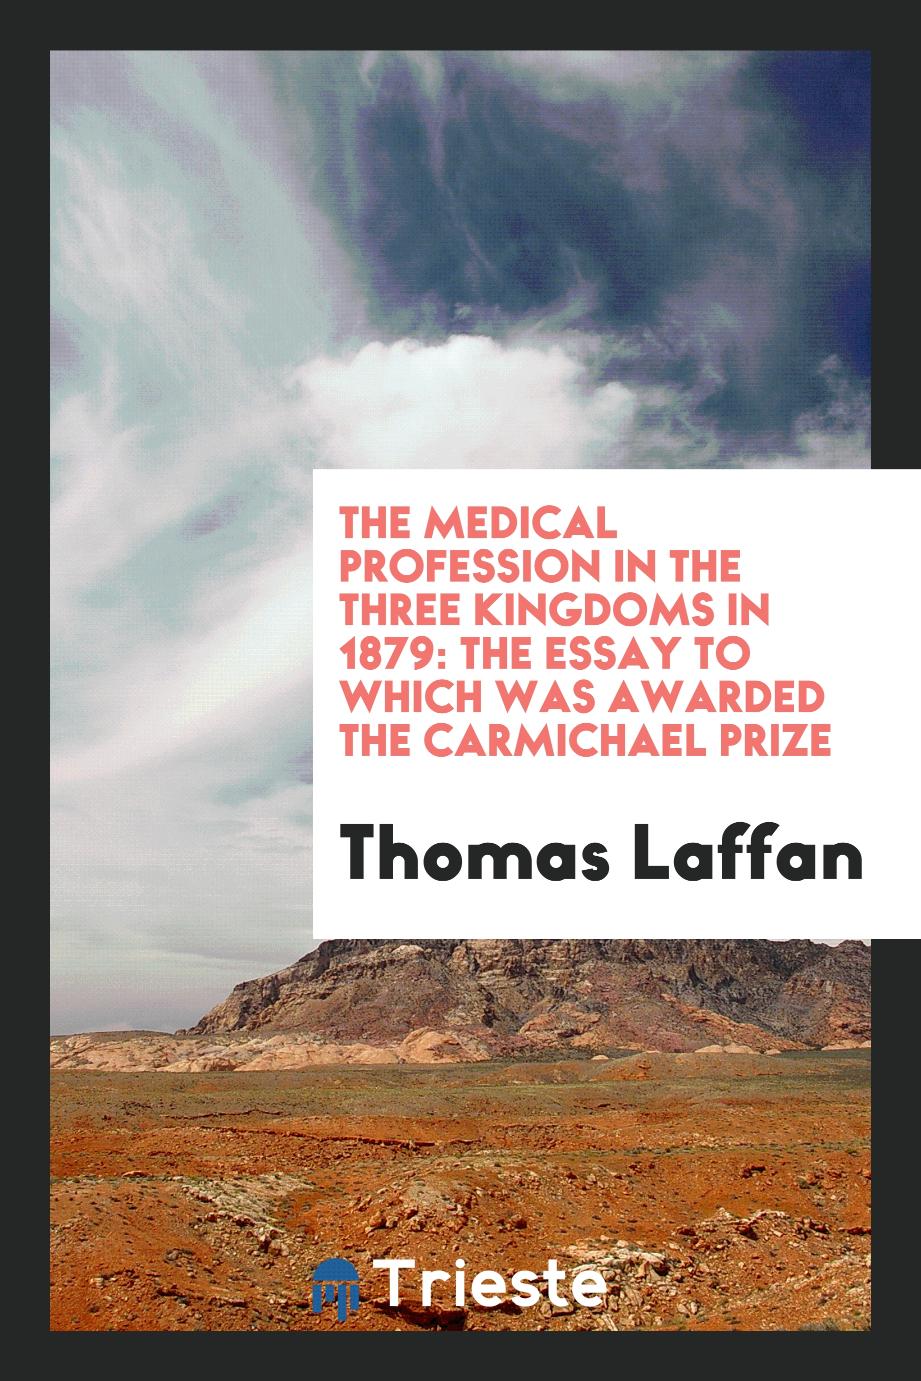 The Medical Profession in the Three Kingdoms in 1879: The Essay to Which Was Awarded the Carmichael Prize